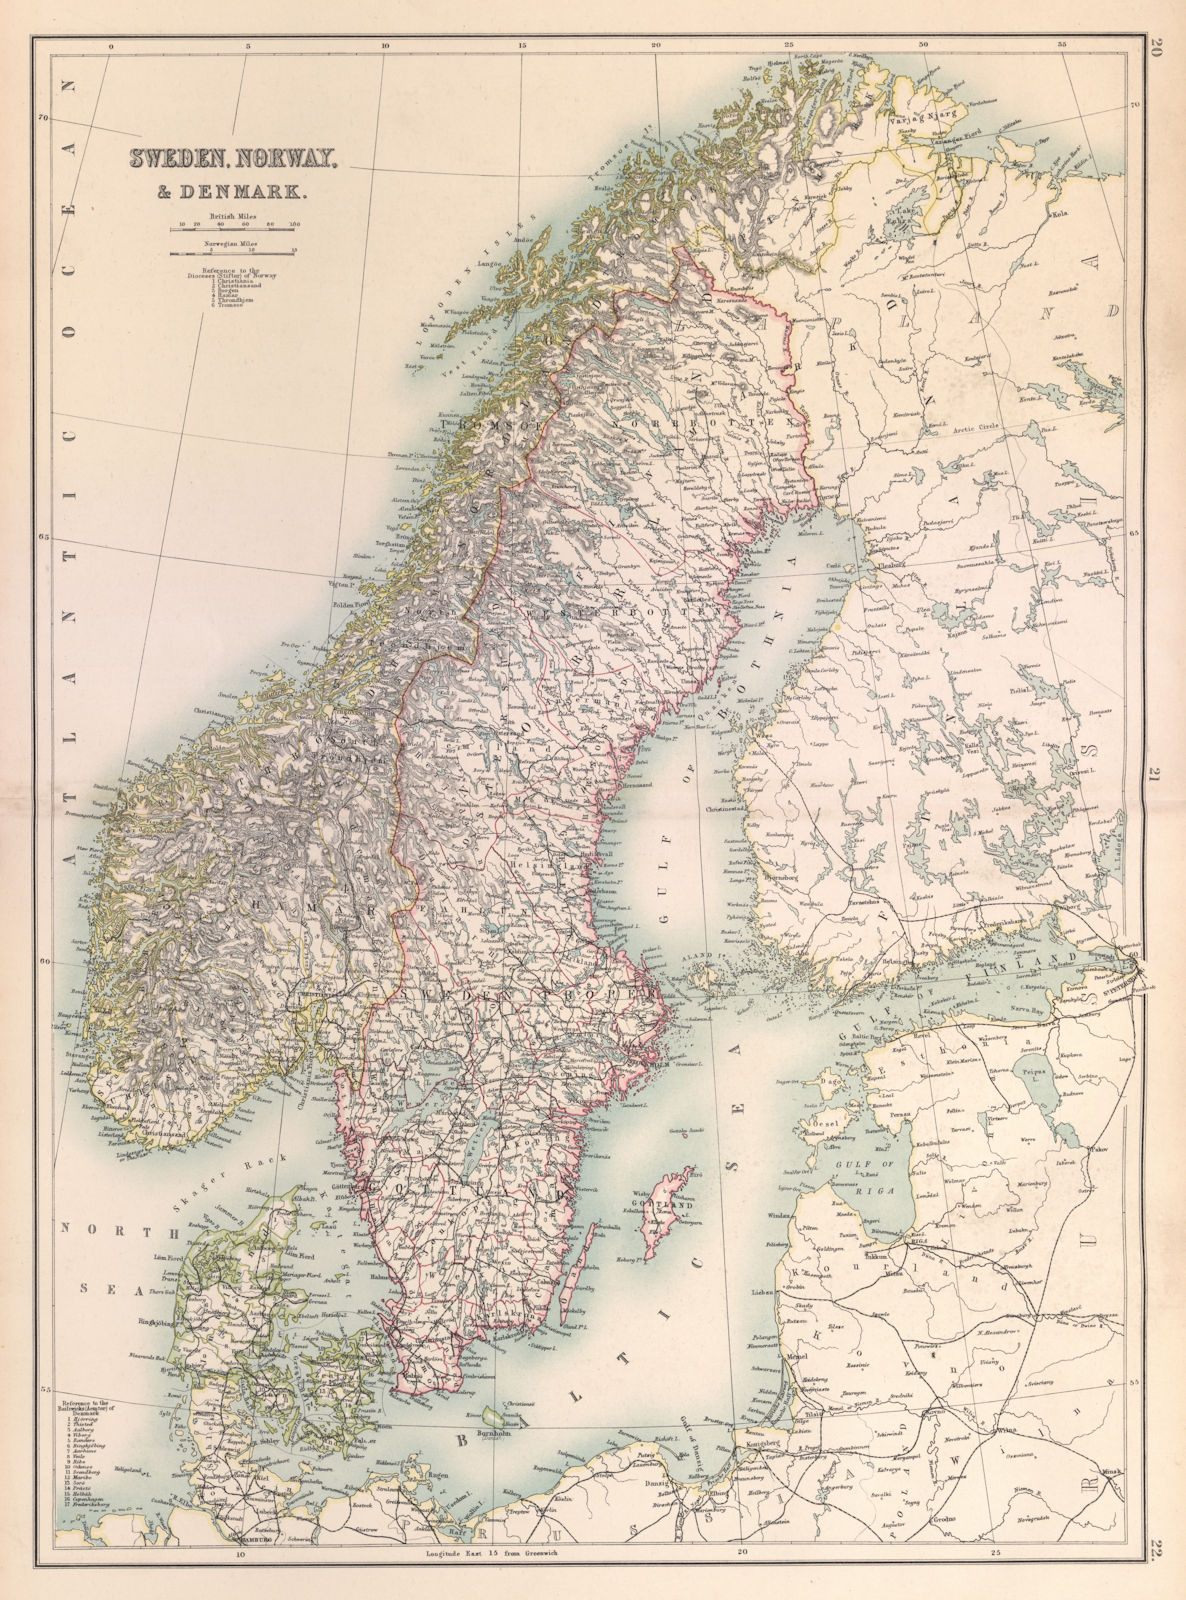 Associate Product Sweden, Norway and Denmark. Scandinavia. BARTHOLOMEW 1898 old antique map